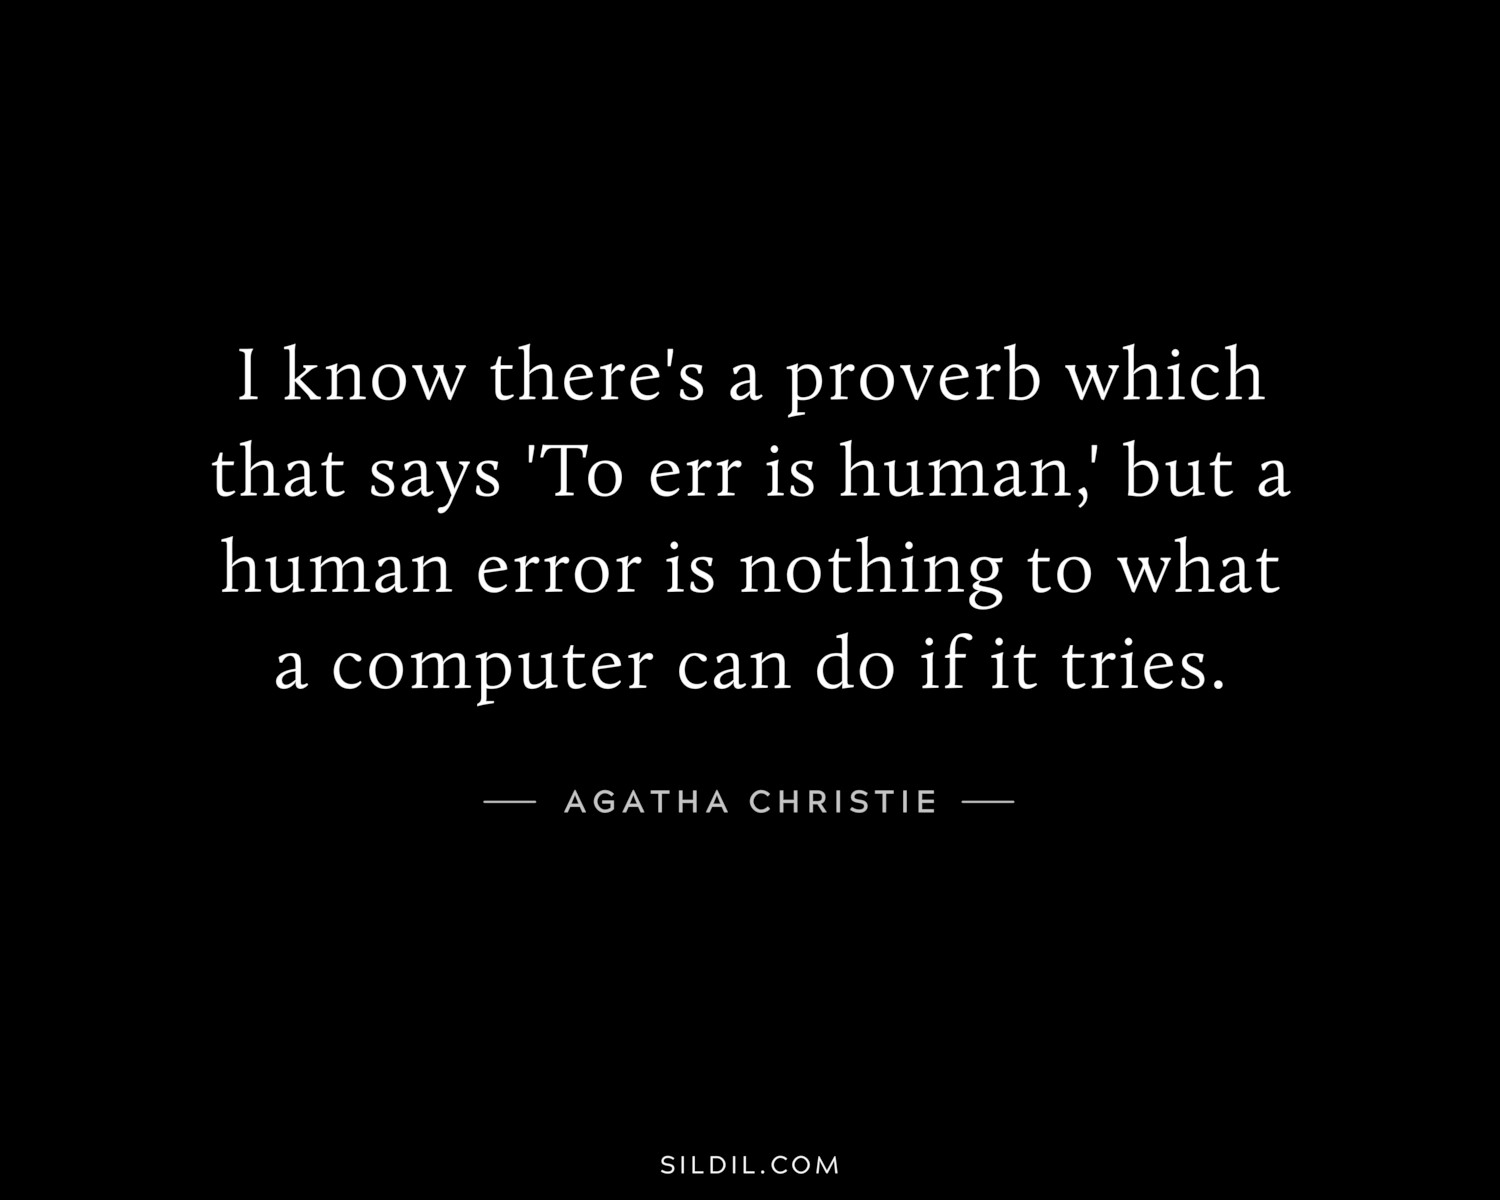 I know there's a proverb which that says 'To err is human,' but a human error is nothing to what a computer can do if it tries.